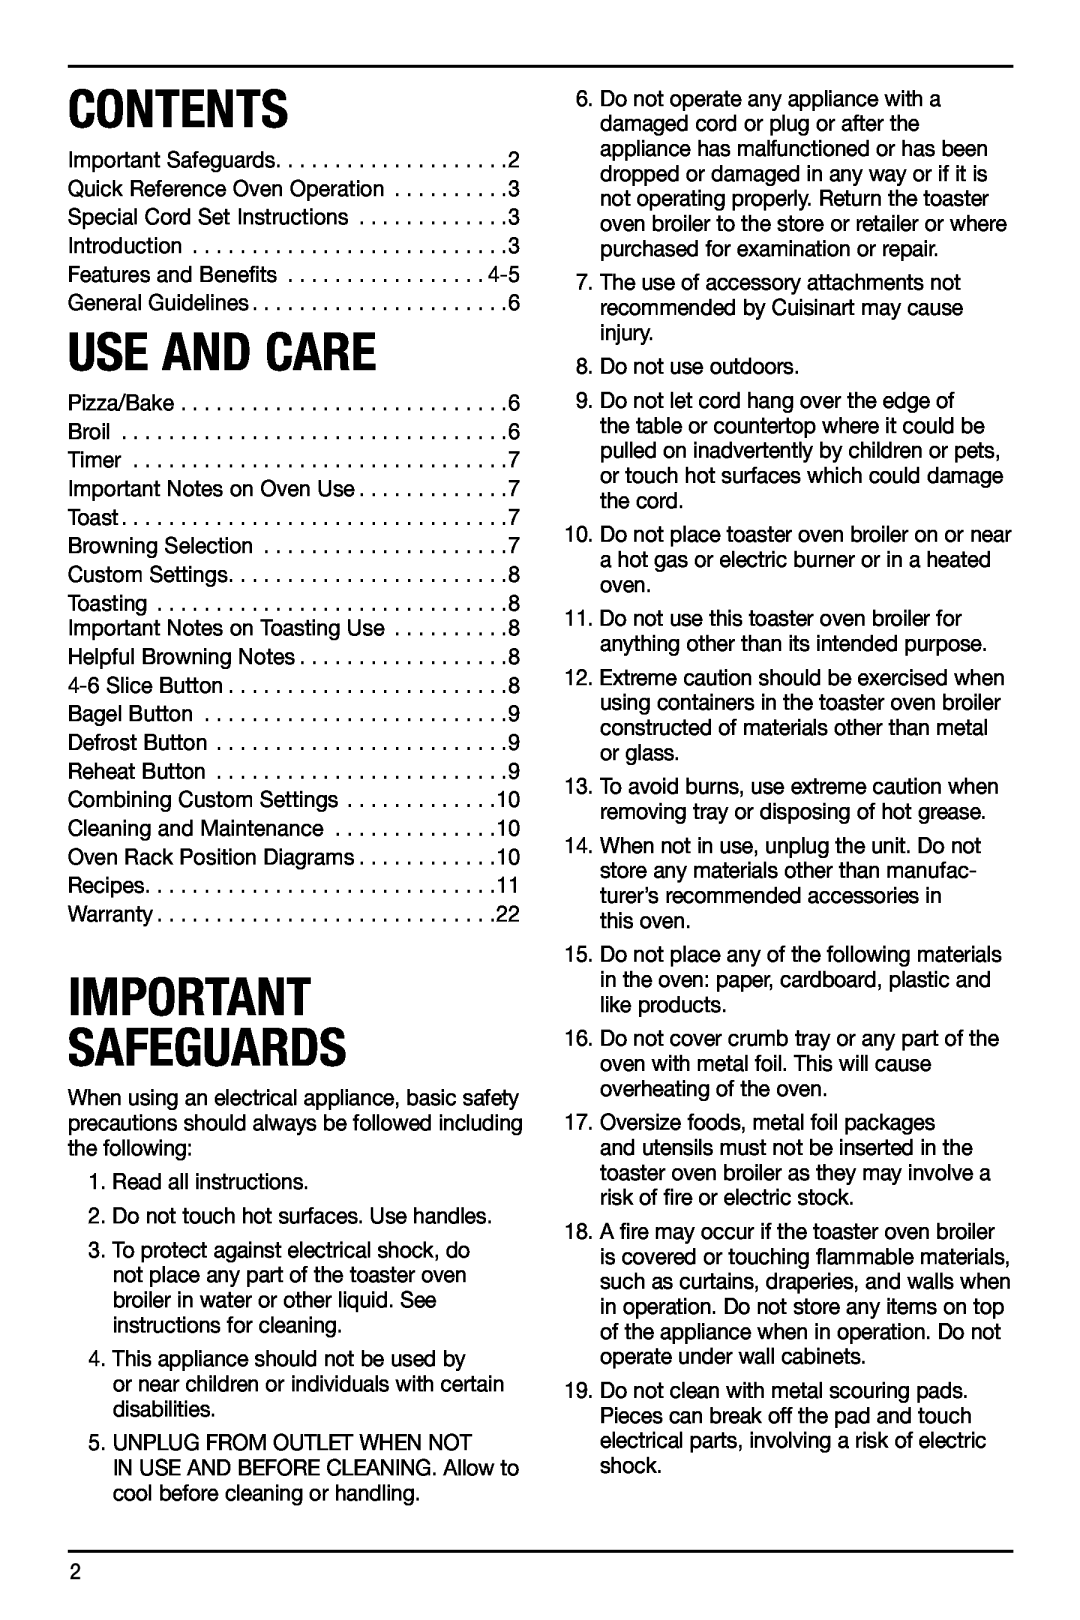 Cuisinart TOB-155 manual Contents, Use And Care, Safeguards 